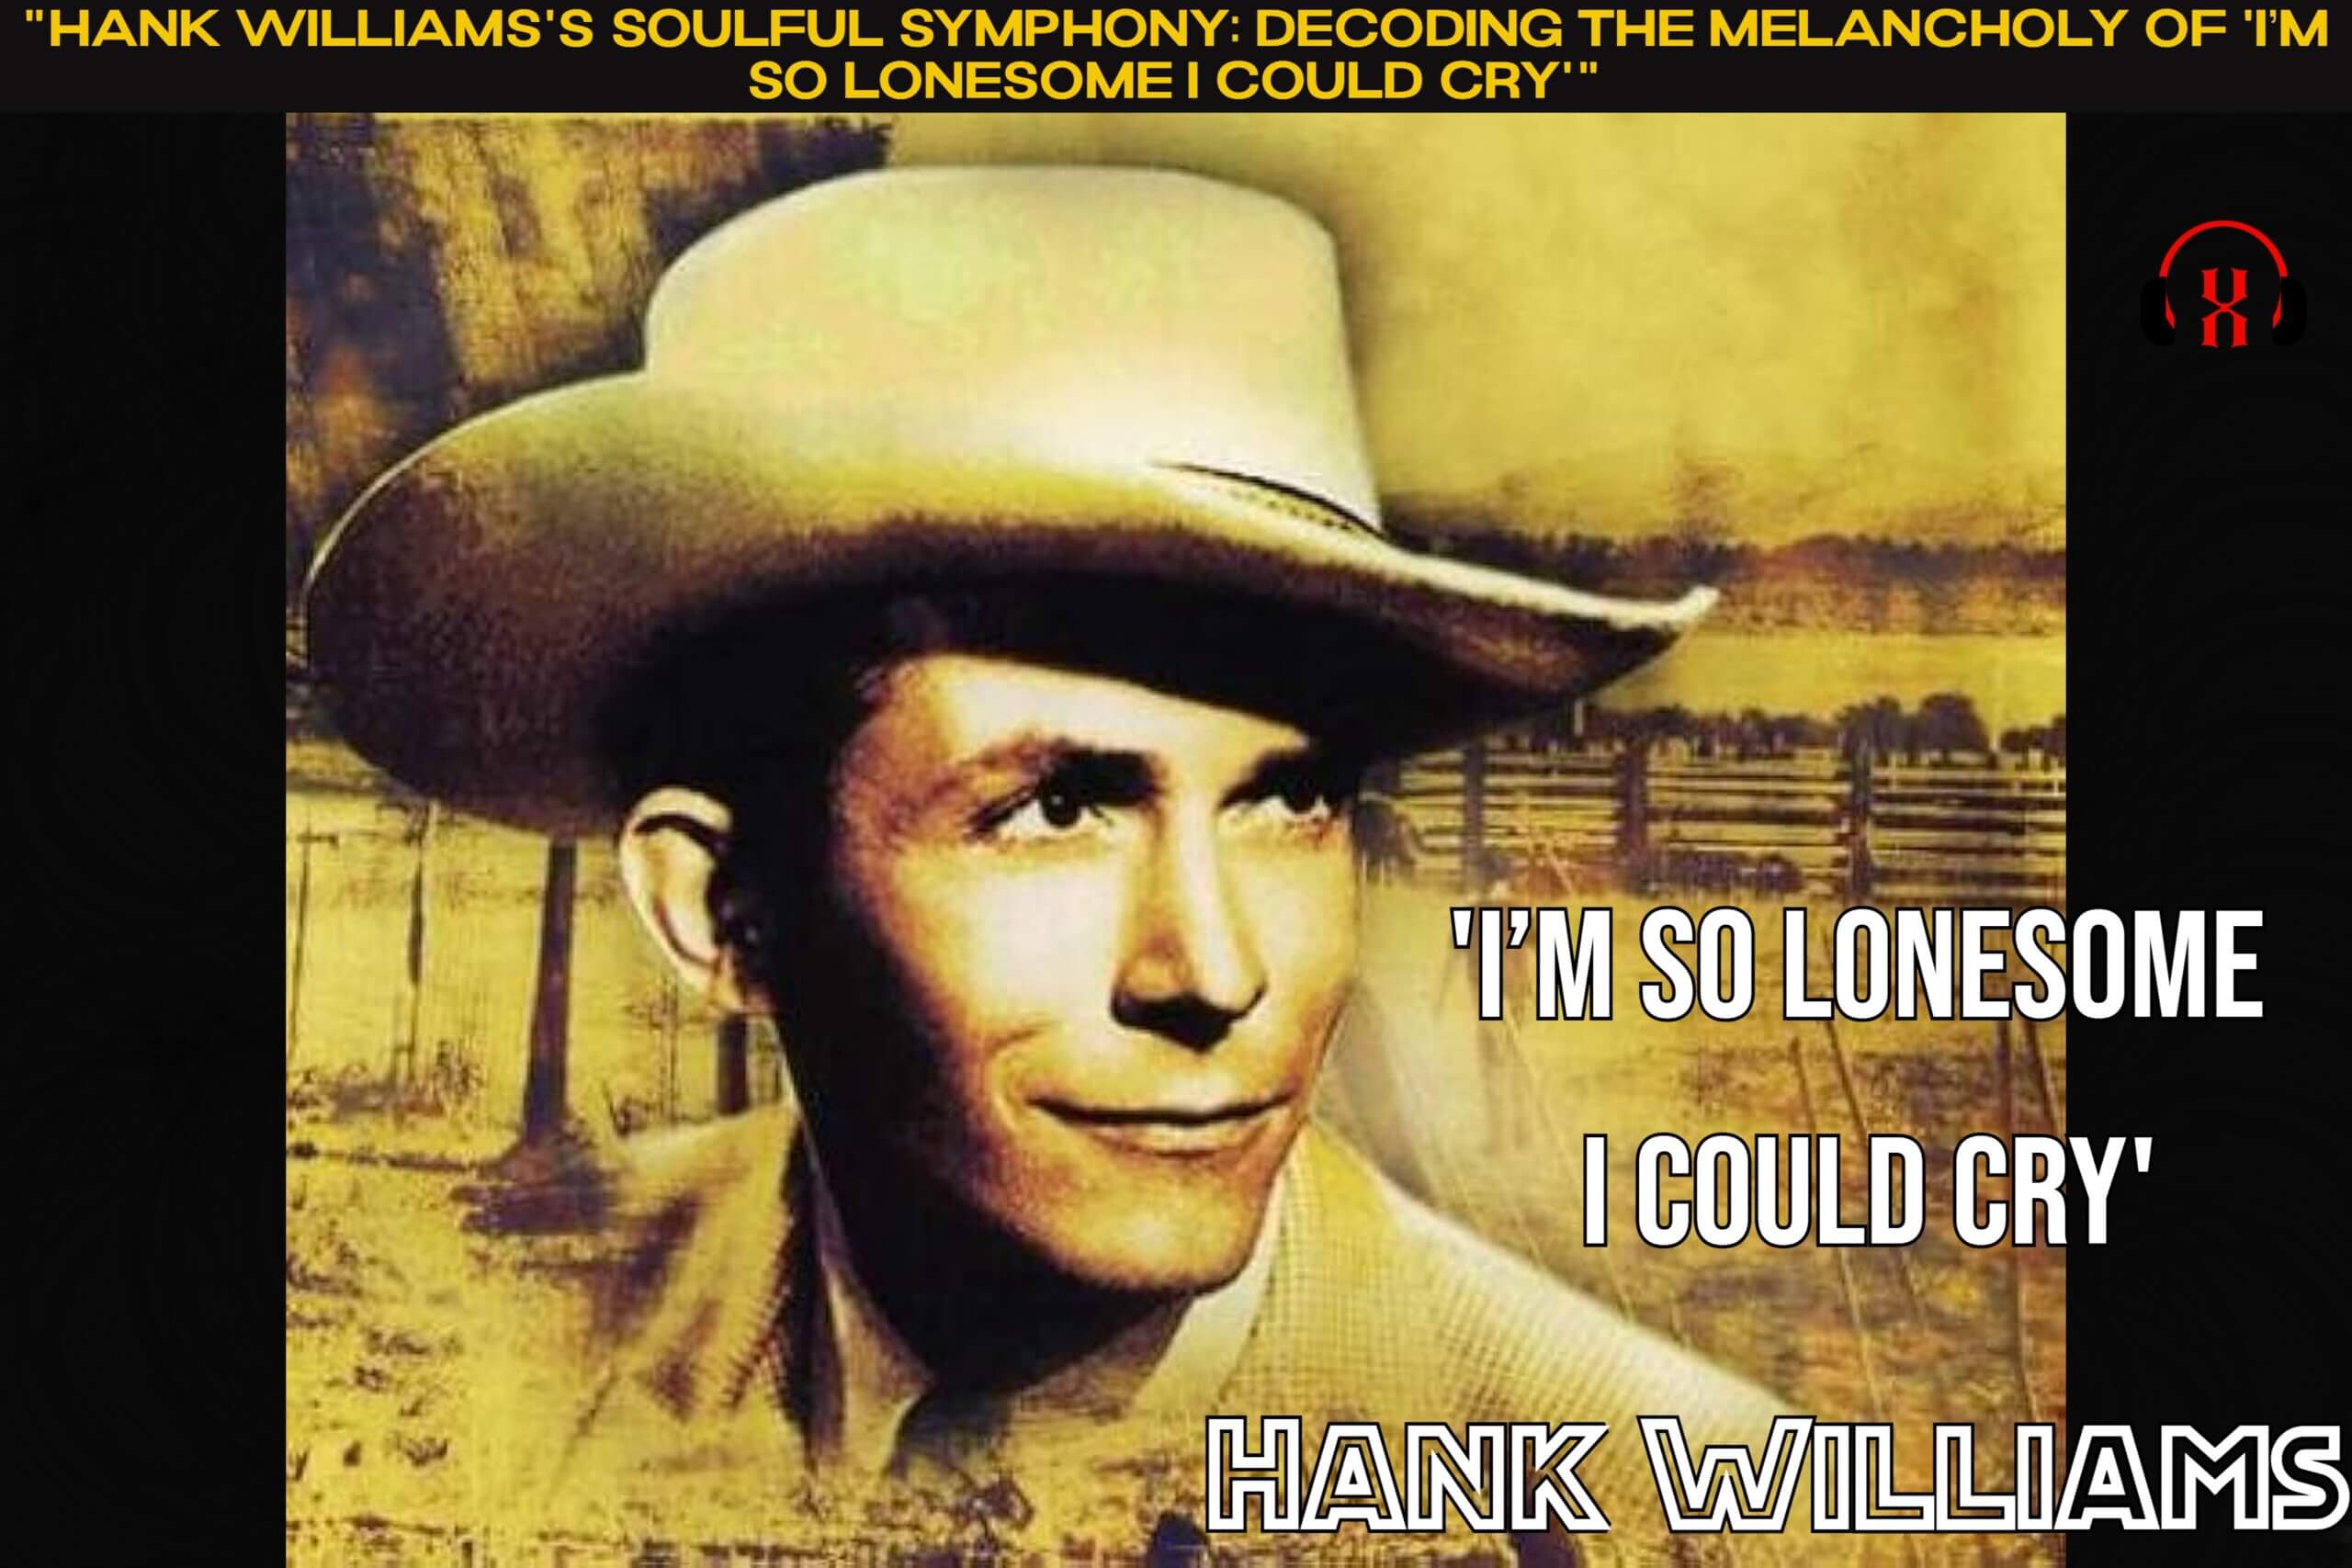 “Hank Williams’s Soulful Symphony: Decoding the Melancholy of ‘I’m So Lonesome I Could Cry'”